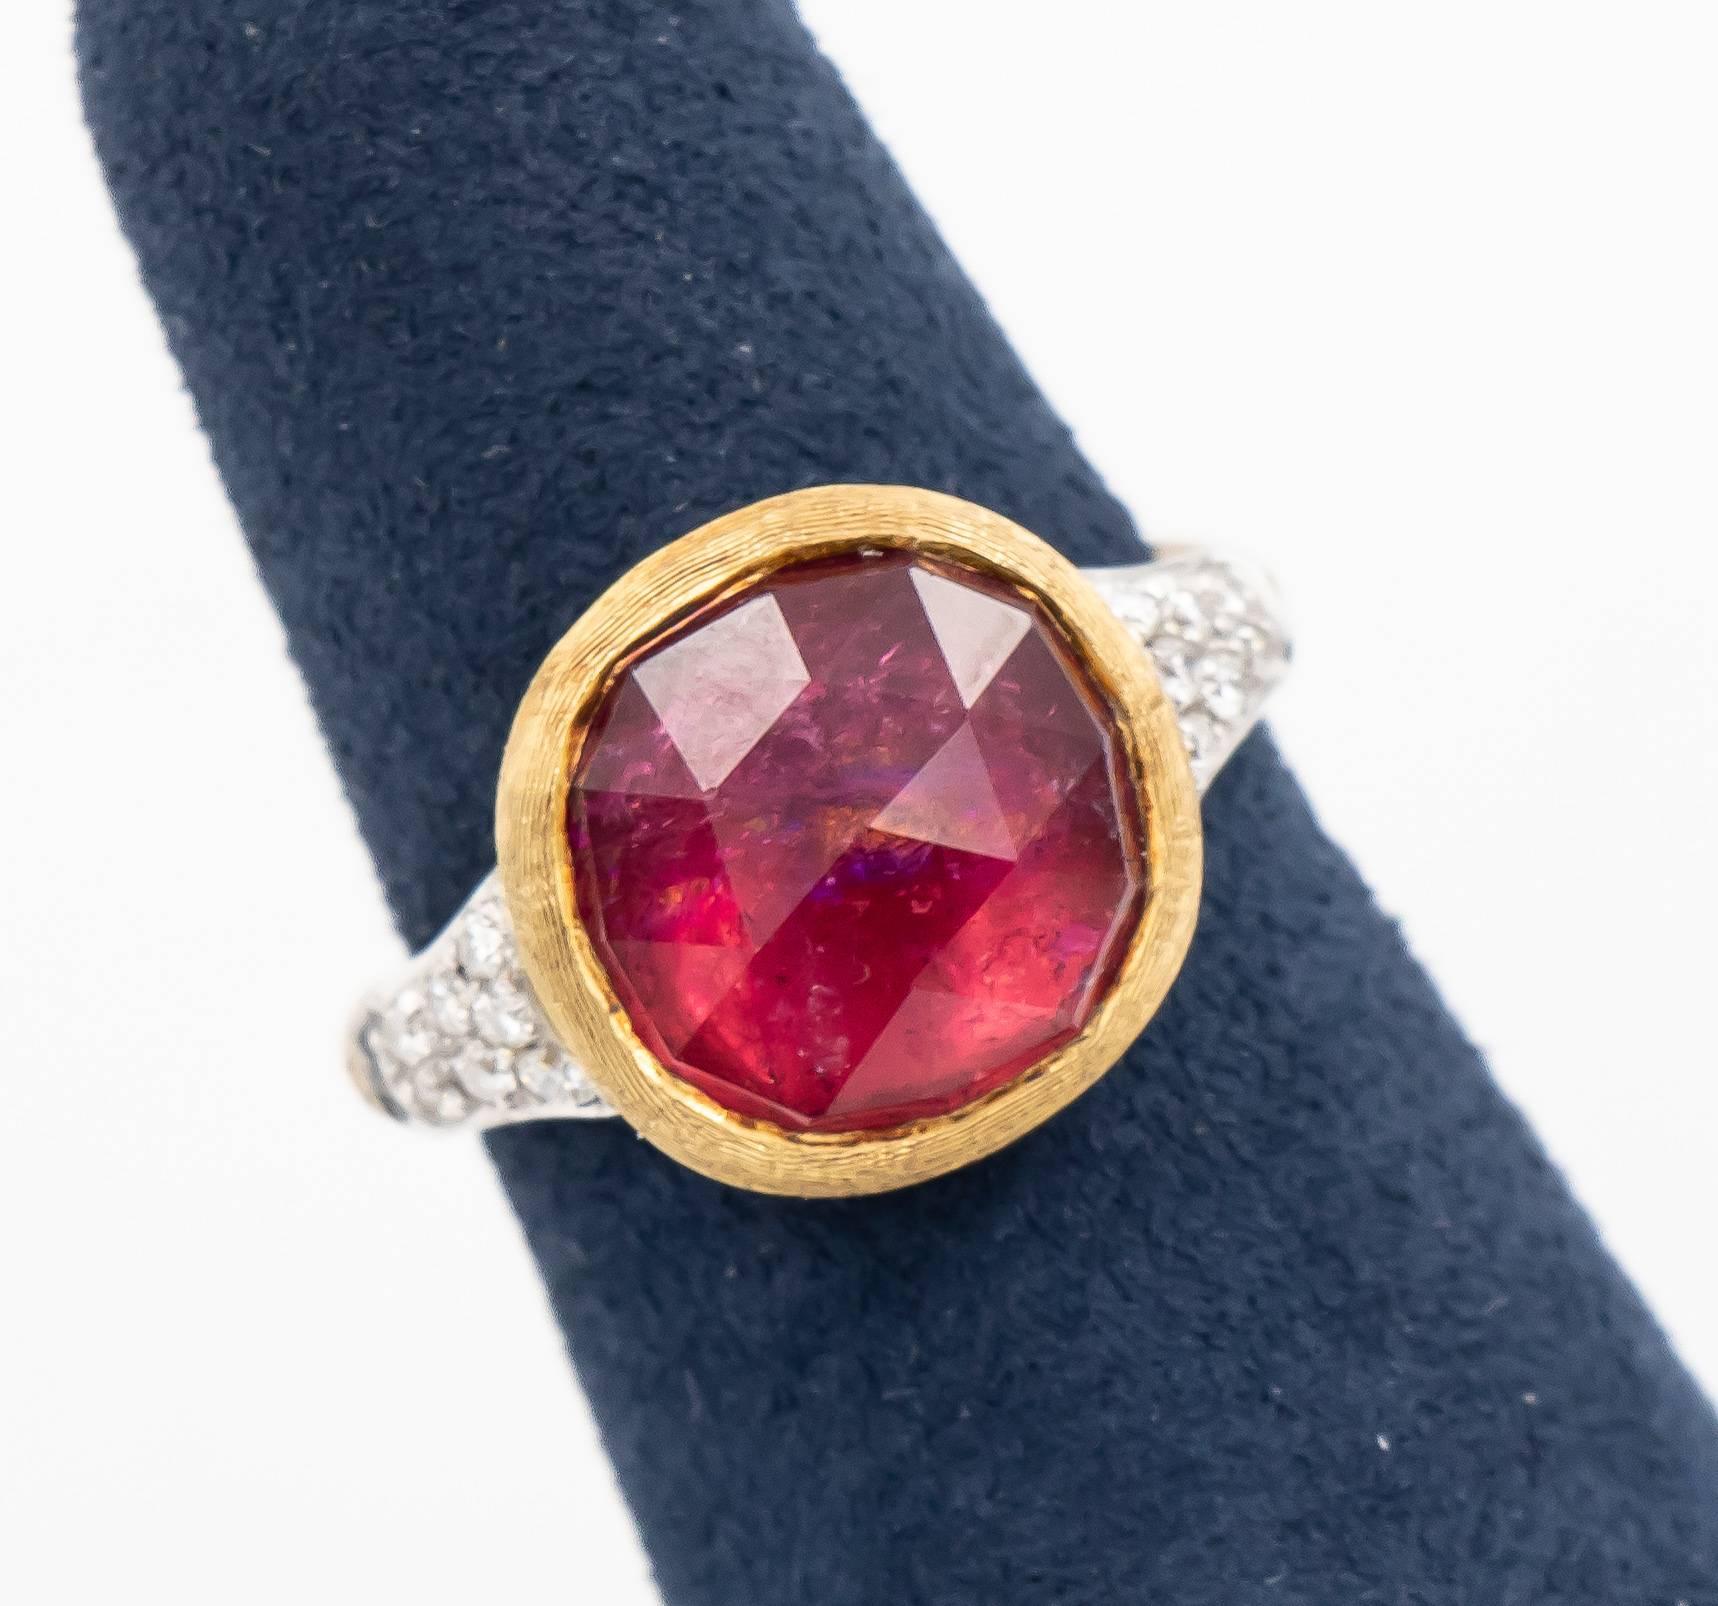 This Marco Bicego ring has a beautiful pink tourmaline center stone.  The center pink tourmaline has a pretty facet configuration and has inclusions which certainly matches the Jaipur style.  There are 7 round brilliant cut diamonds on each side of